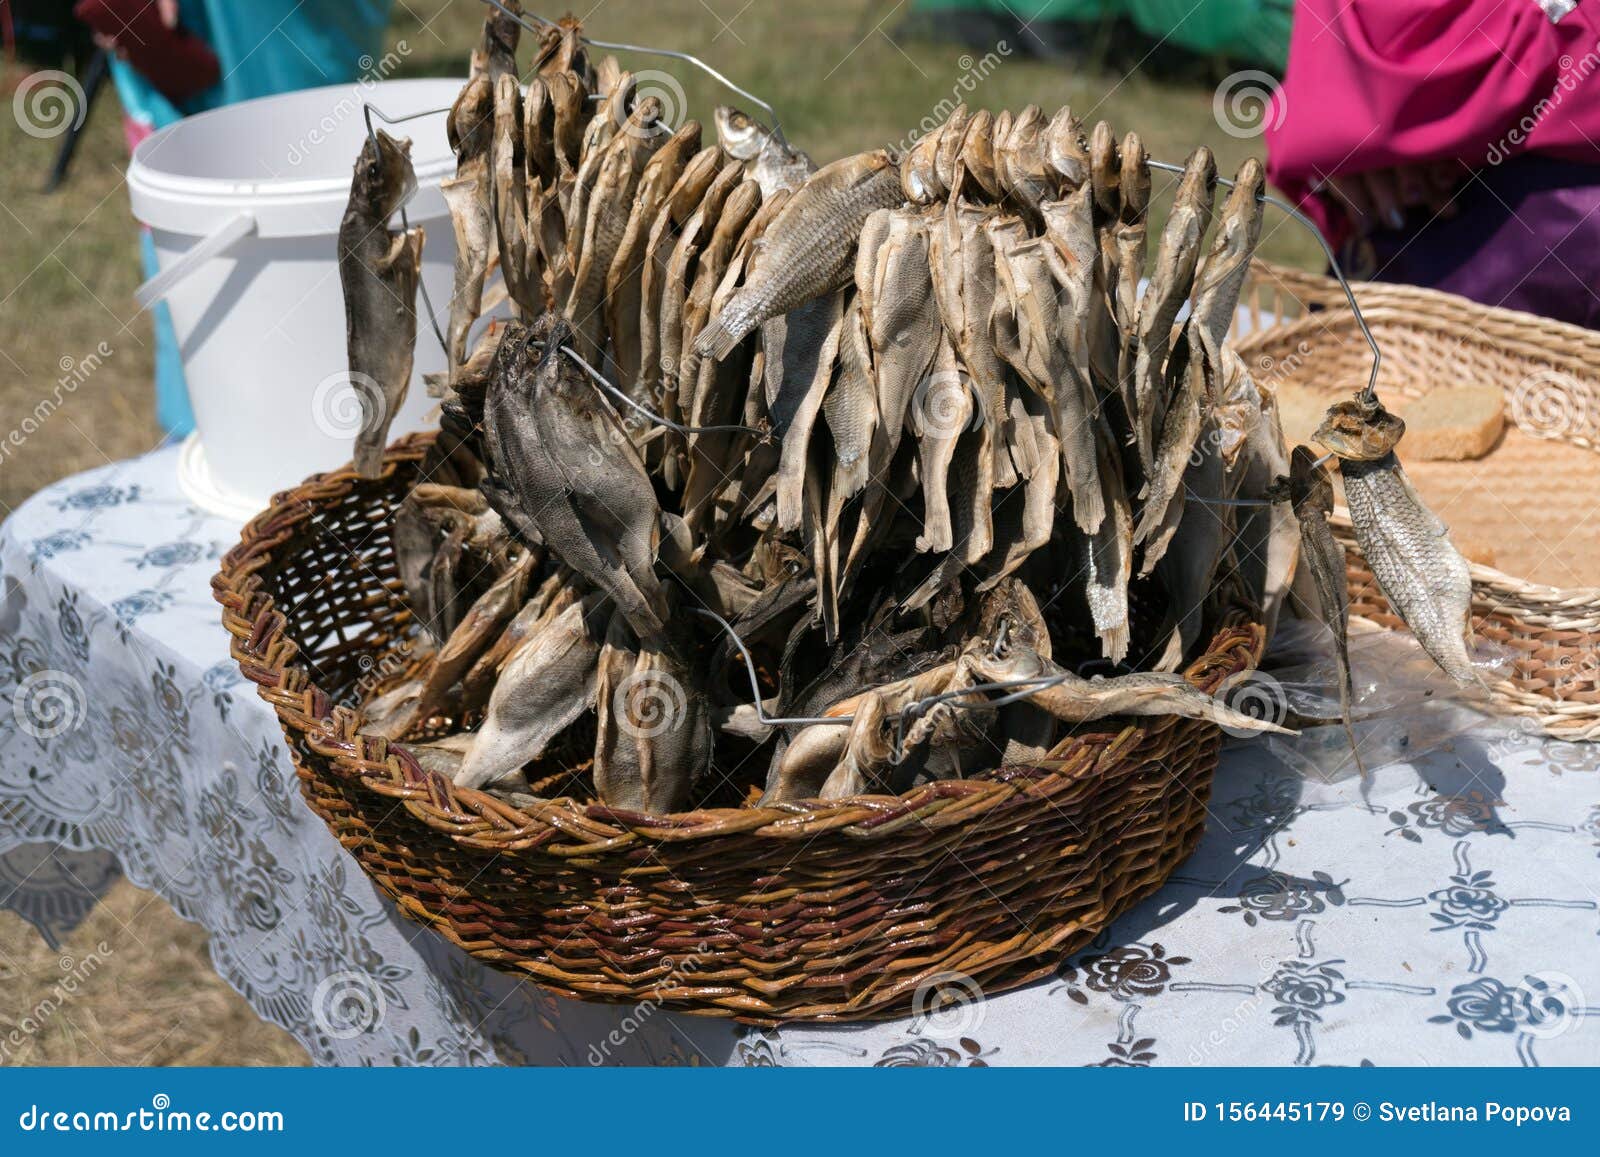 https://thumbs.dreamstime.com/z/salted-dried-fish-roach-strung-wire-lies-wicker-willow-basket-standing-table-156445179.jpg